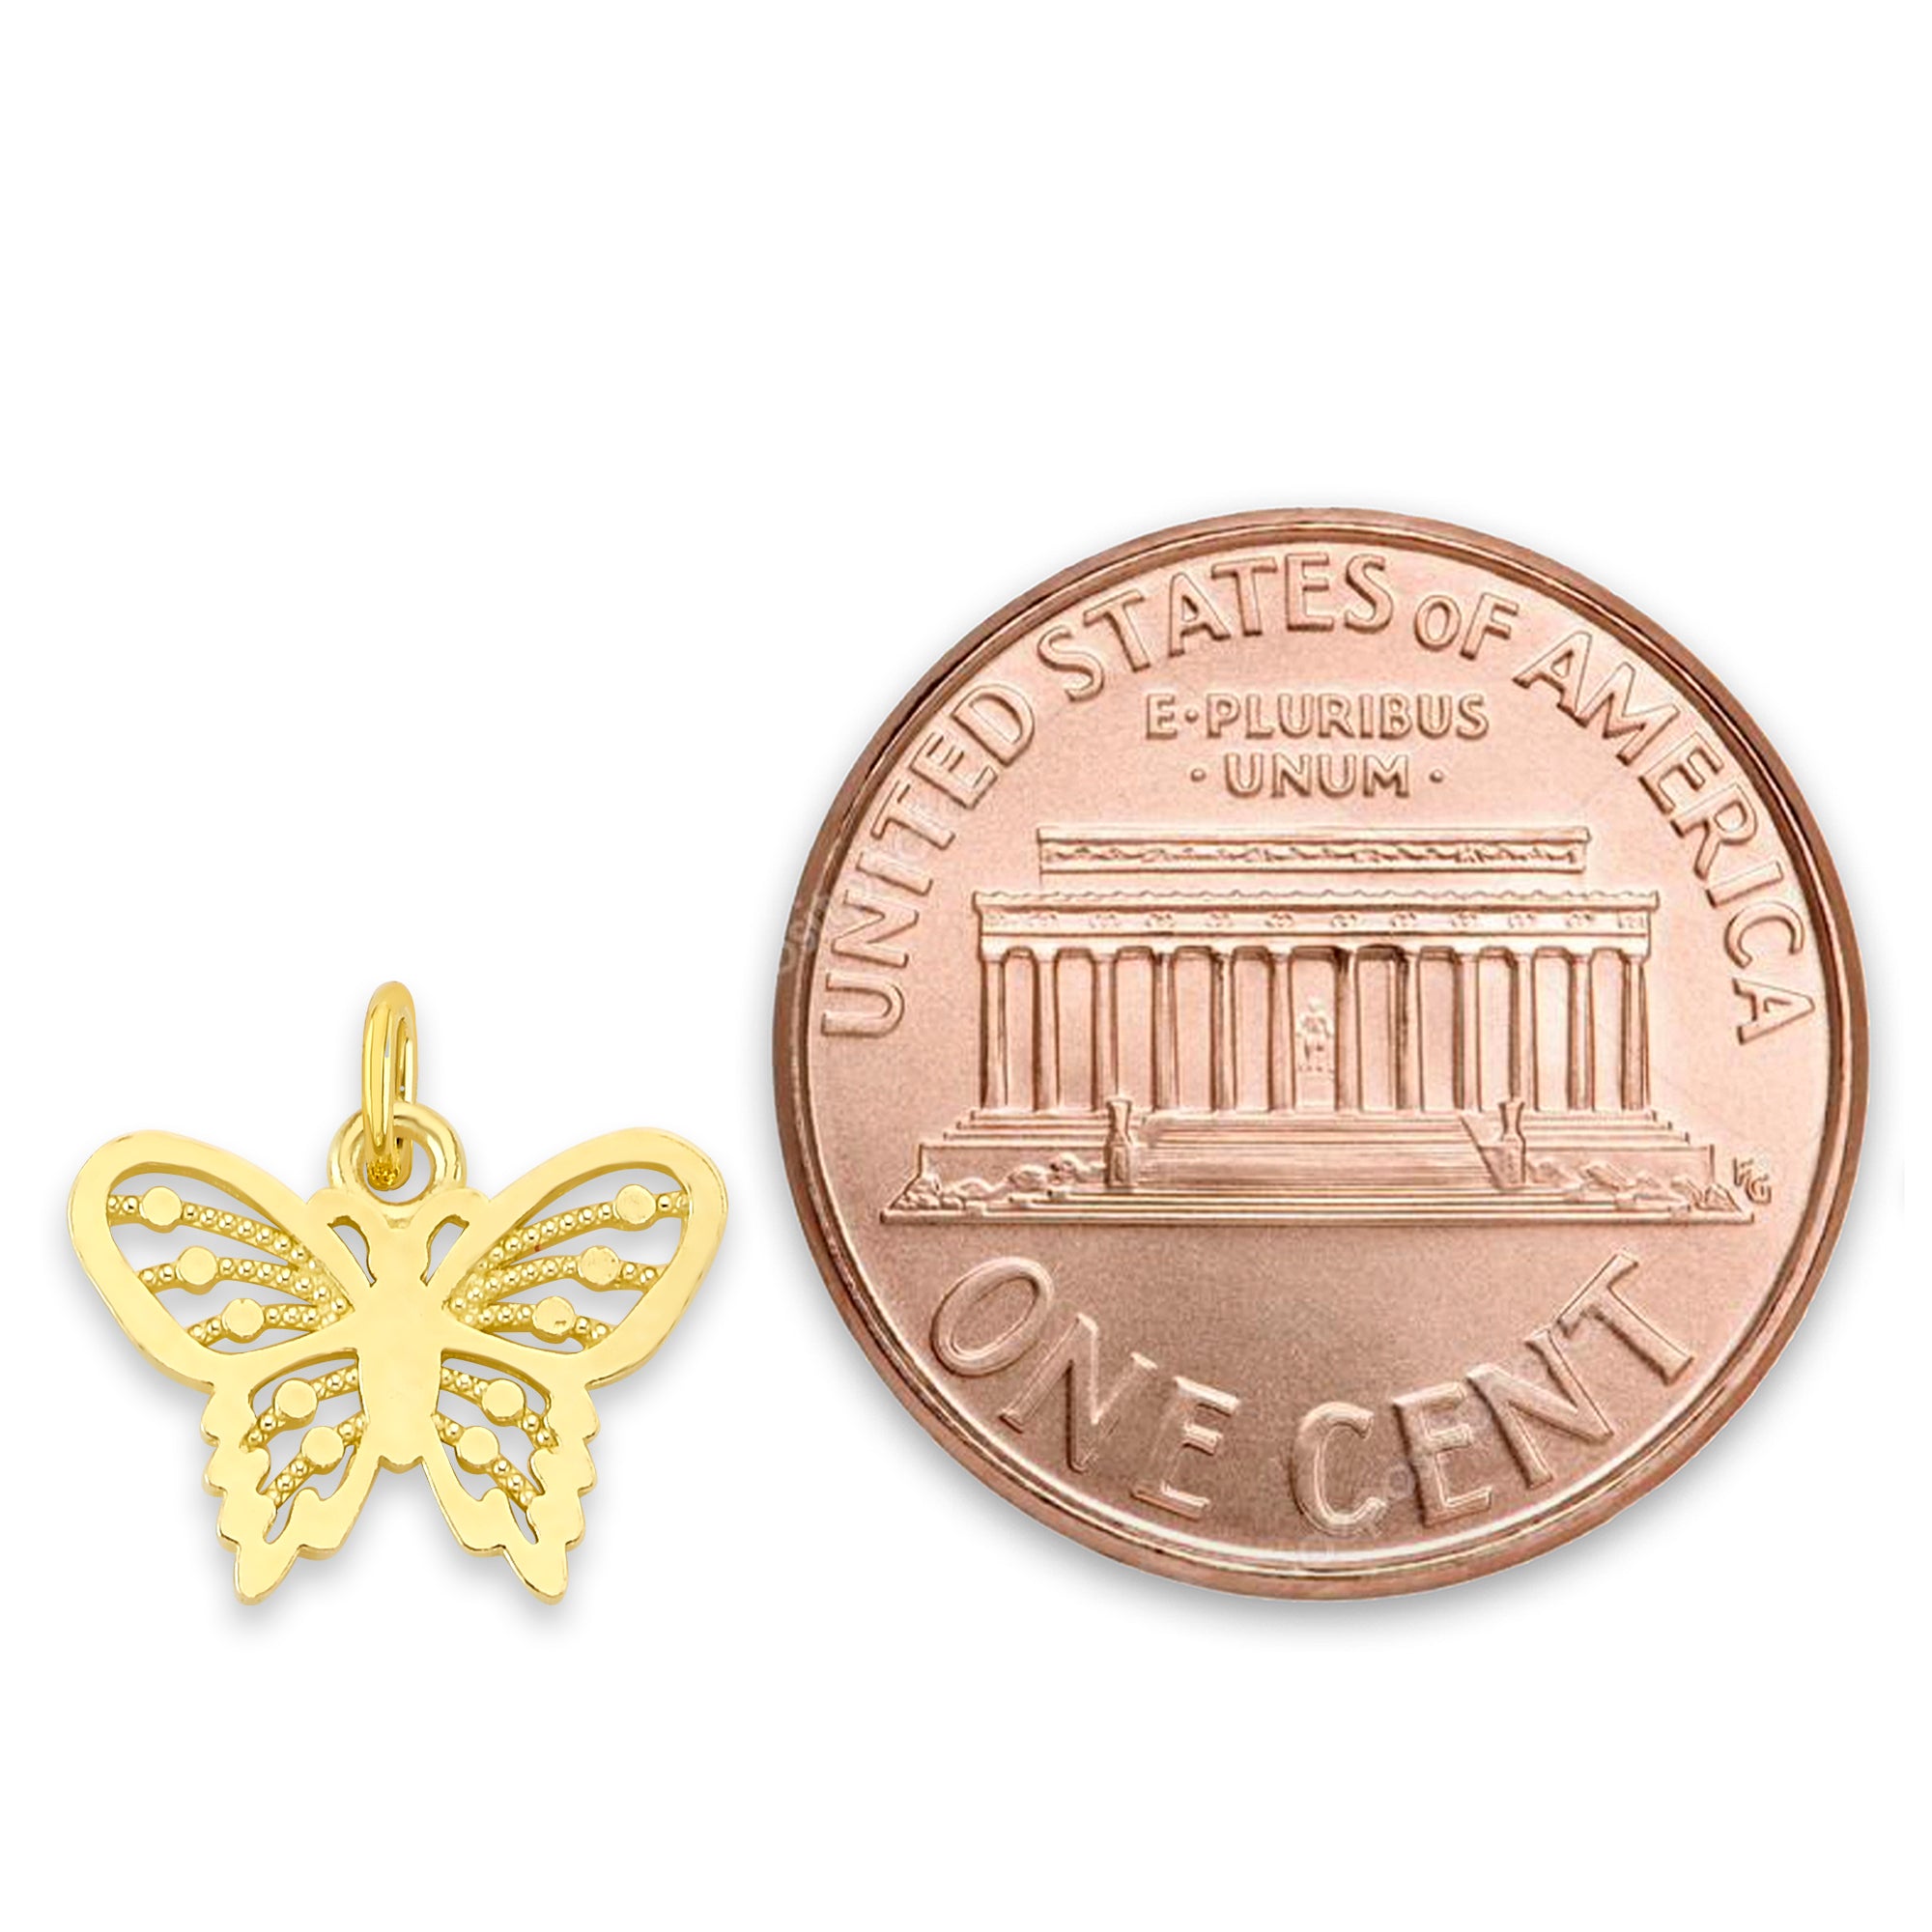 Solid Gold Butterfly Charm with Clasp - 10k or 14k